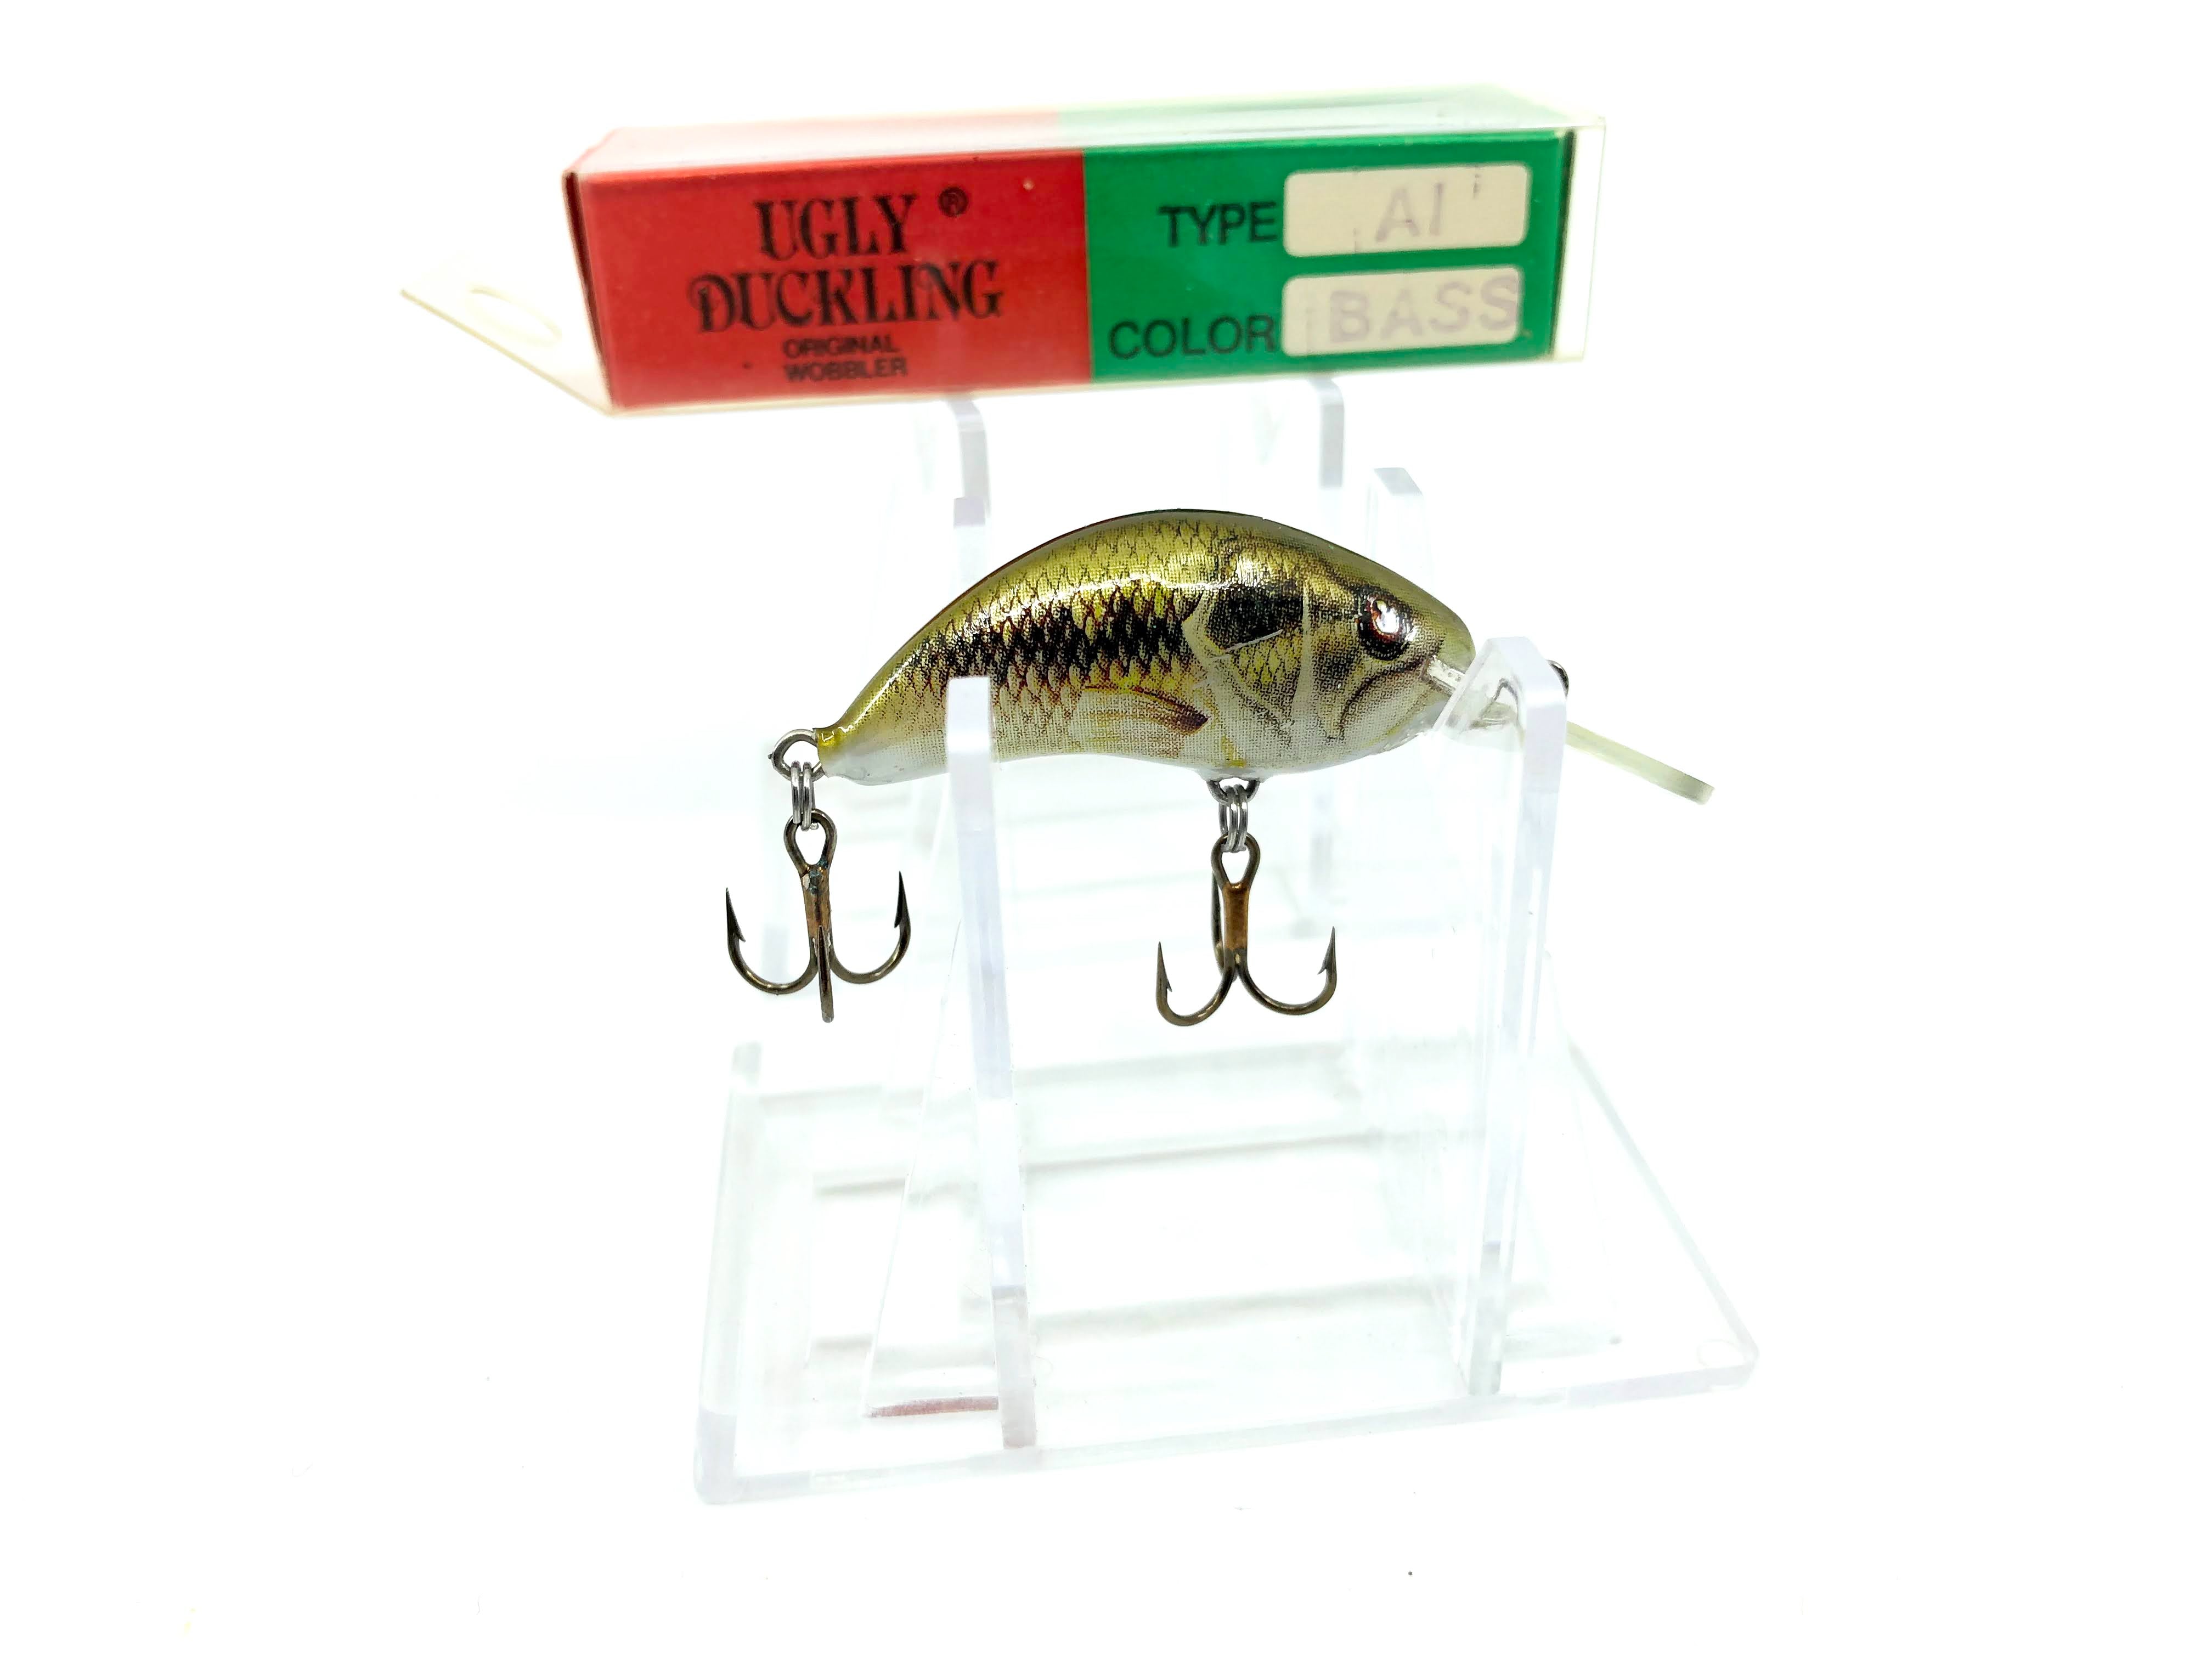 Ugly Duckling Balsa Lure Bass Color Size 4 New in Box Old Stock